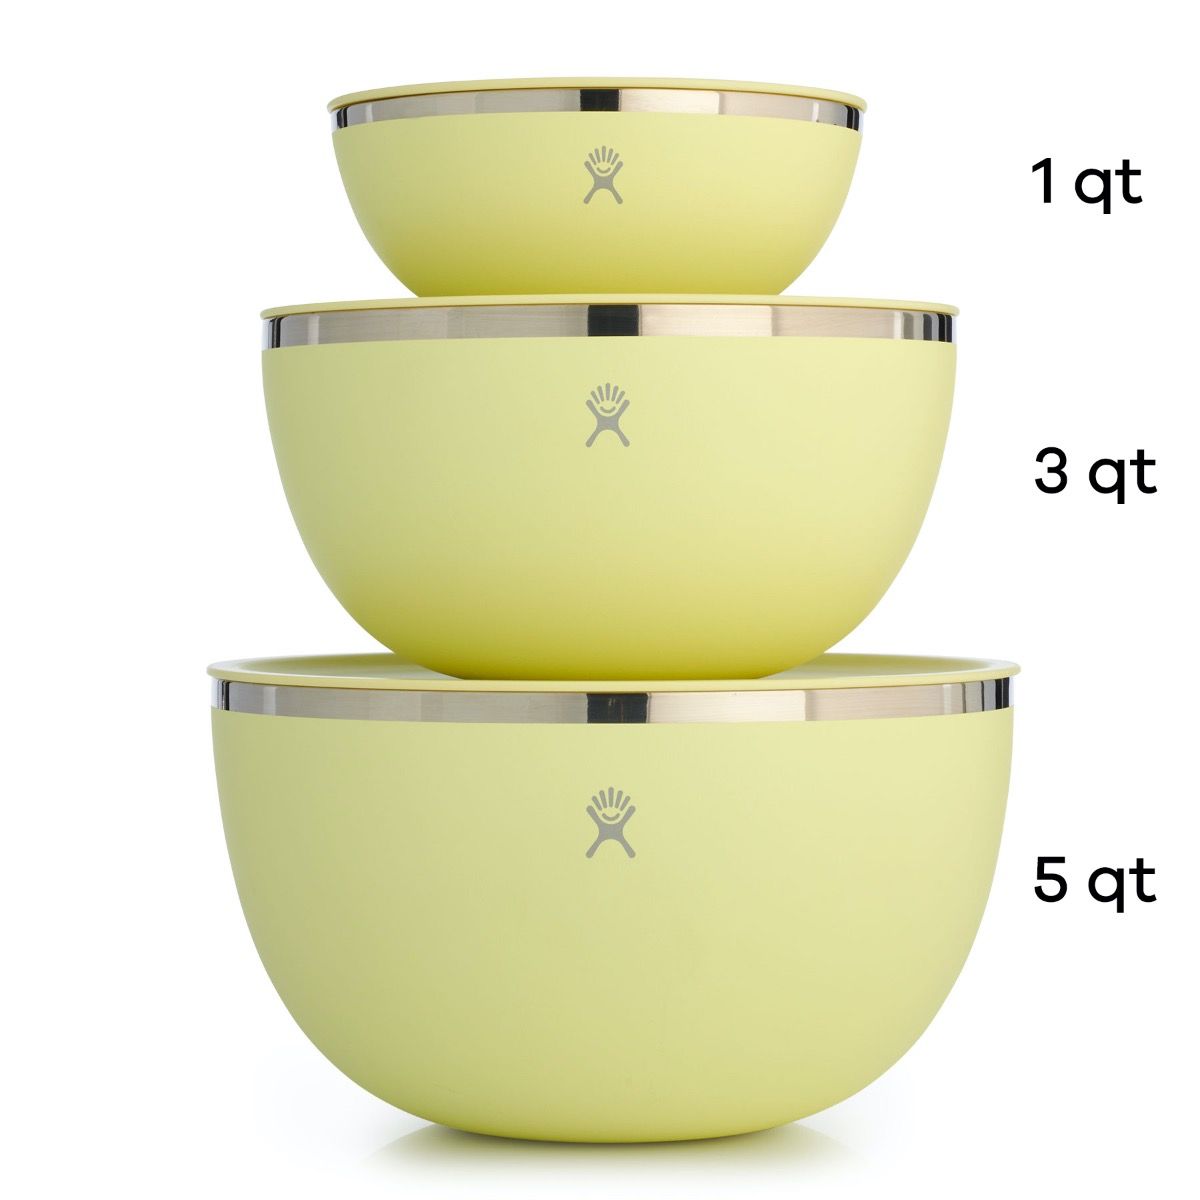 https://borregooutfitters.com/wp-content/uploads/Hydro-Flask-qt-bowl-with-lid-size-Borrego-Outfitters-scaled.jpg